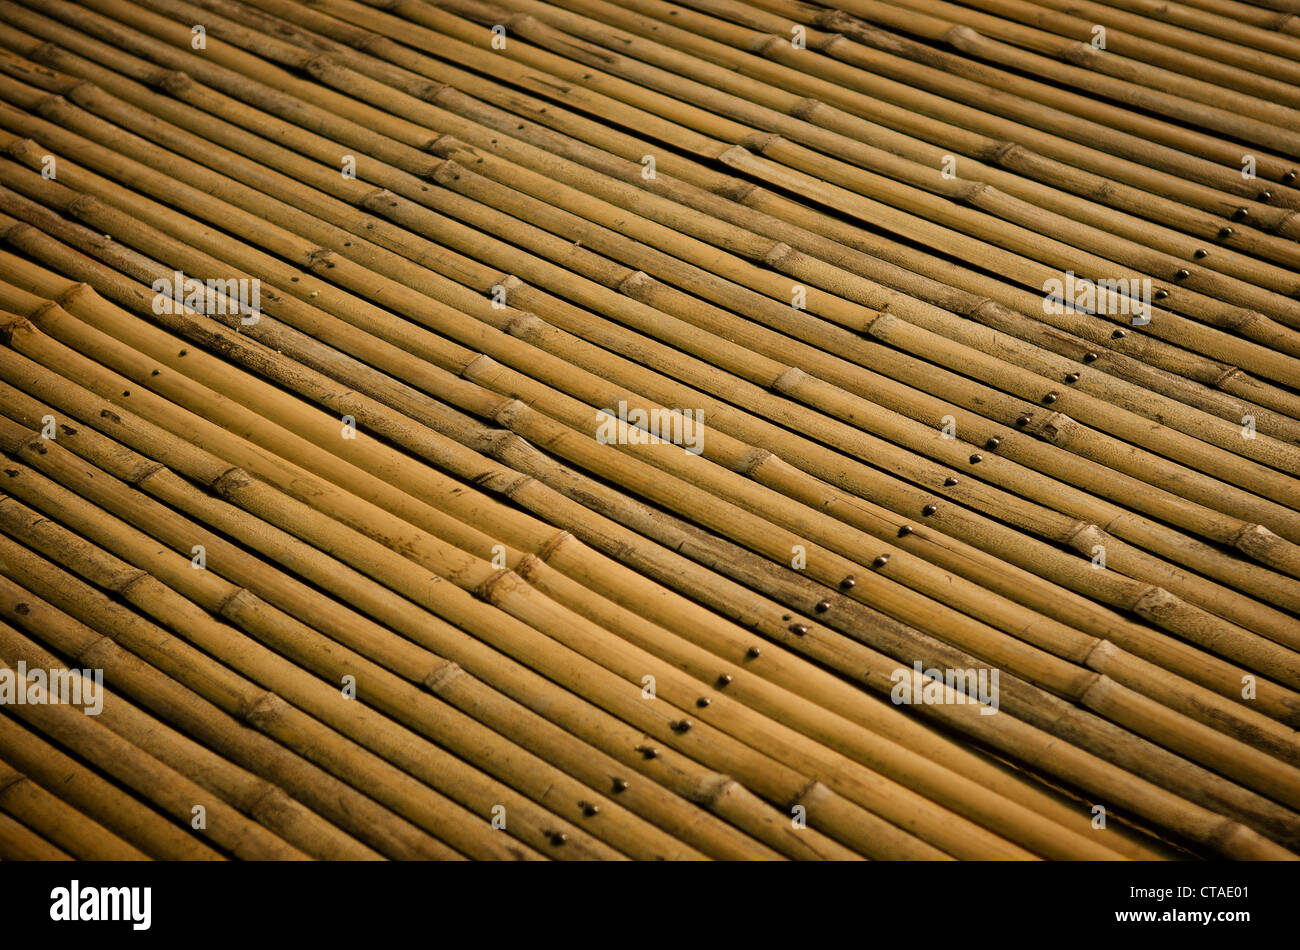 detail of bamboo surface Stock Photo